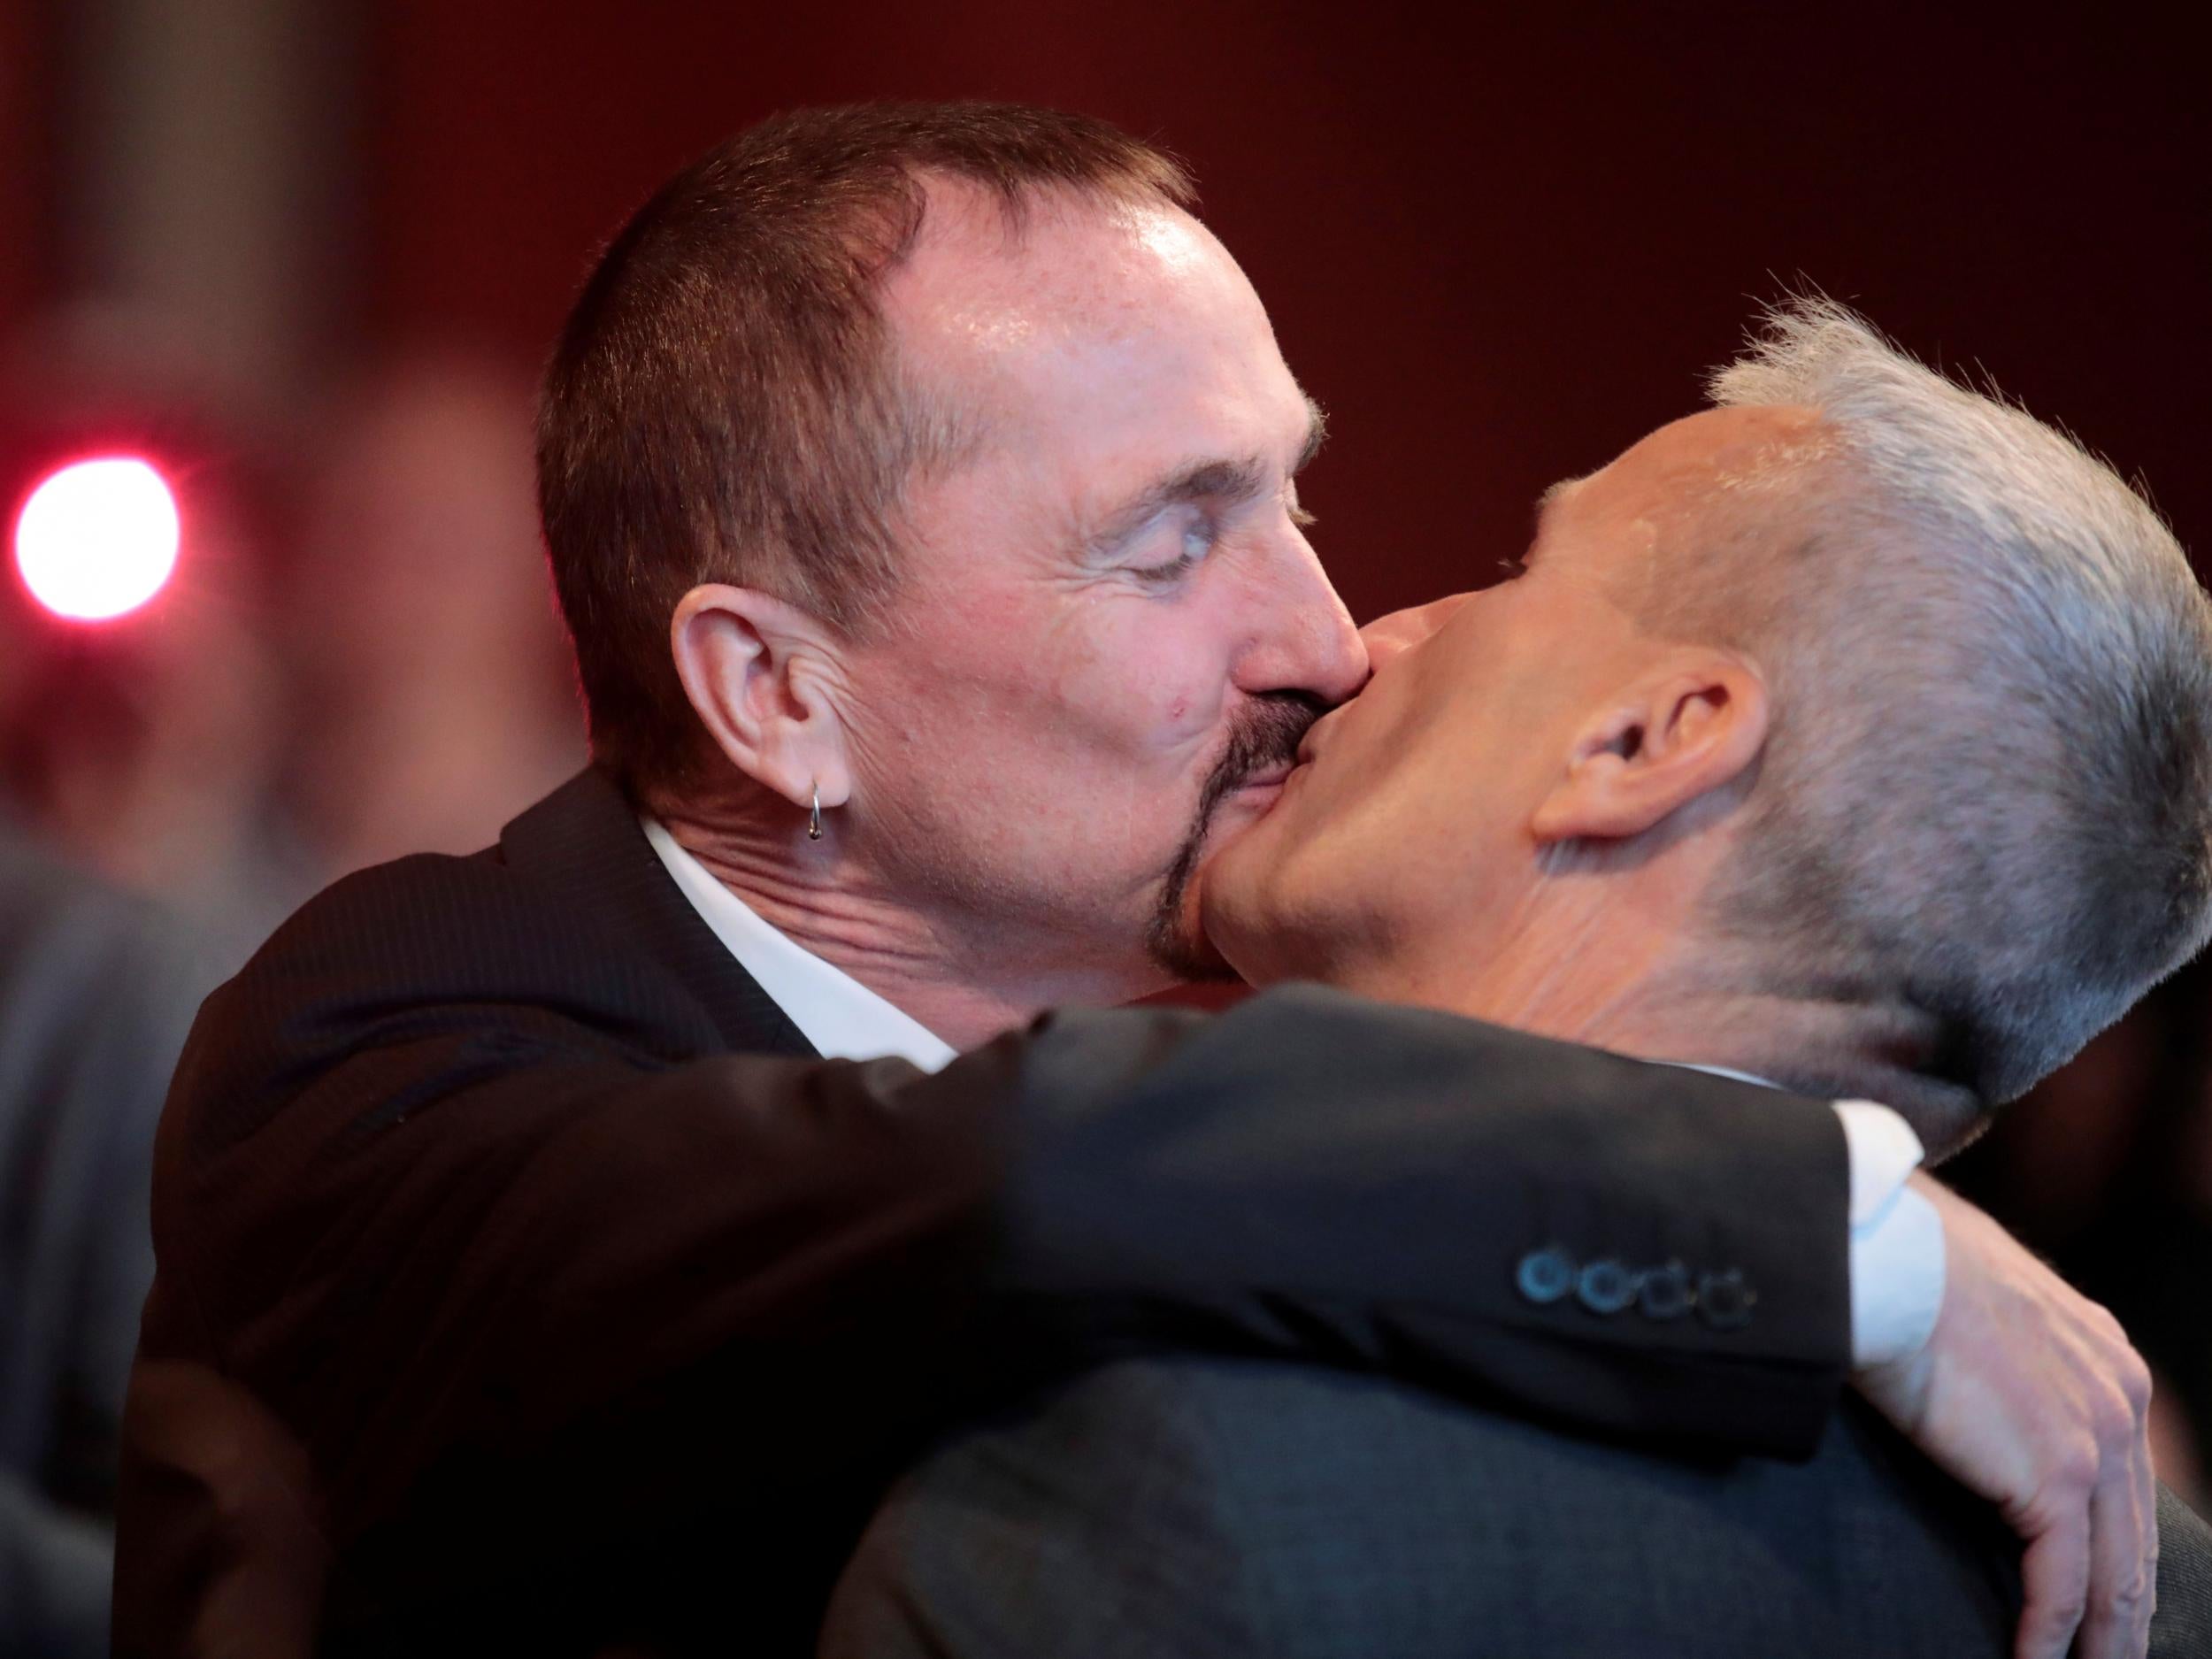 Germany celebrates first gay wedding after historic parliamentary vote The Independent The Independent